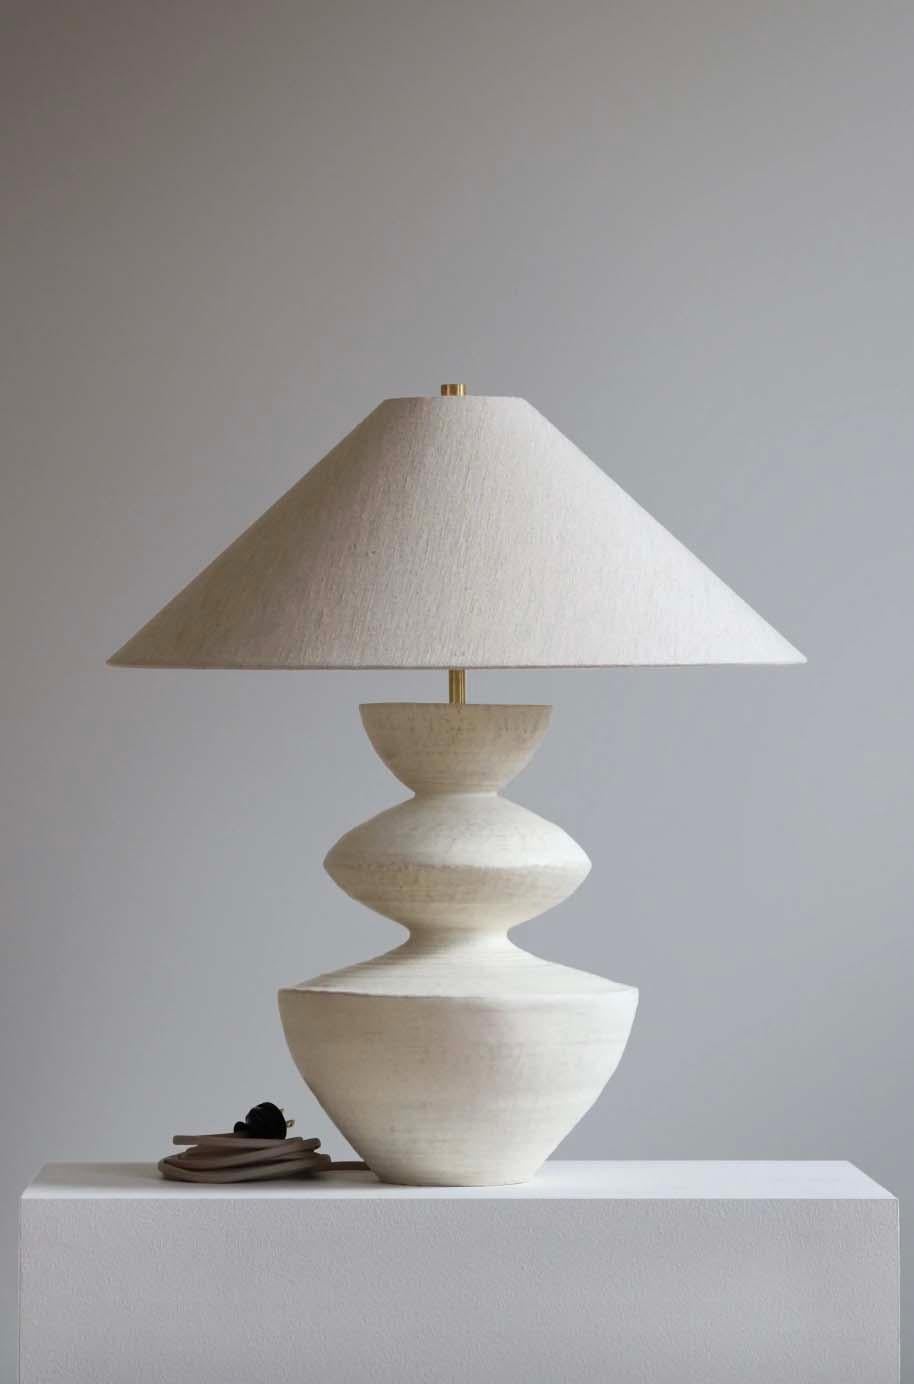 The Janus lamp is handmade studio pottery by ceramic artist by Danny Kaplan. Shade included. Please note exact dimensions may vary.

Born in New York City and raised in Aix-en-Provence, France, Danny Kaplan’s passion for ceramics was shaped by early